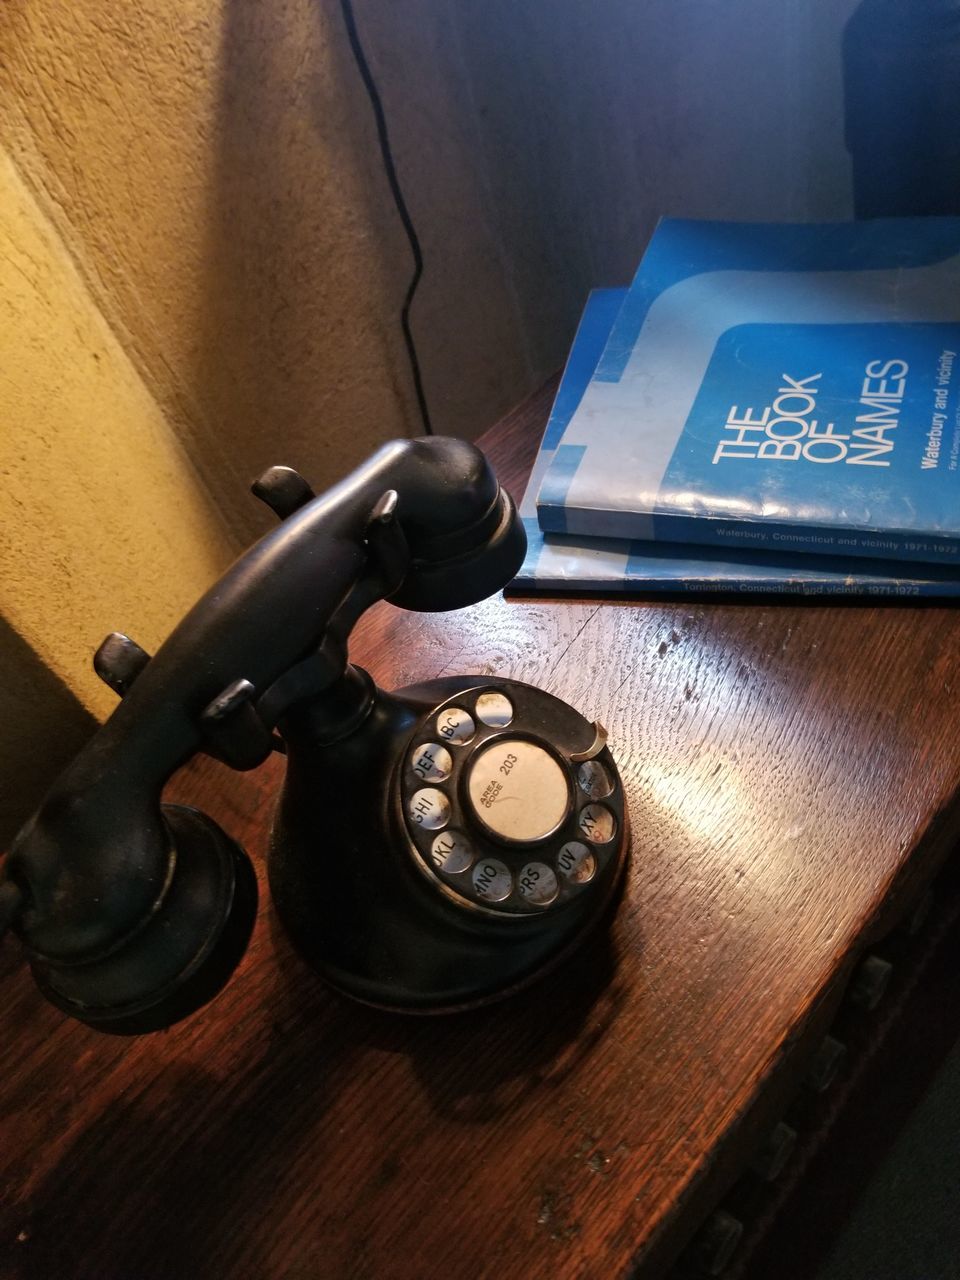 CLOSE-UP OF TELEPHONE ON TABLE